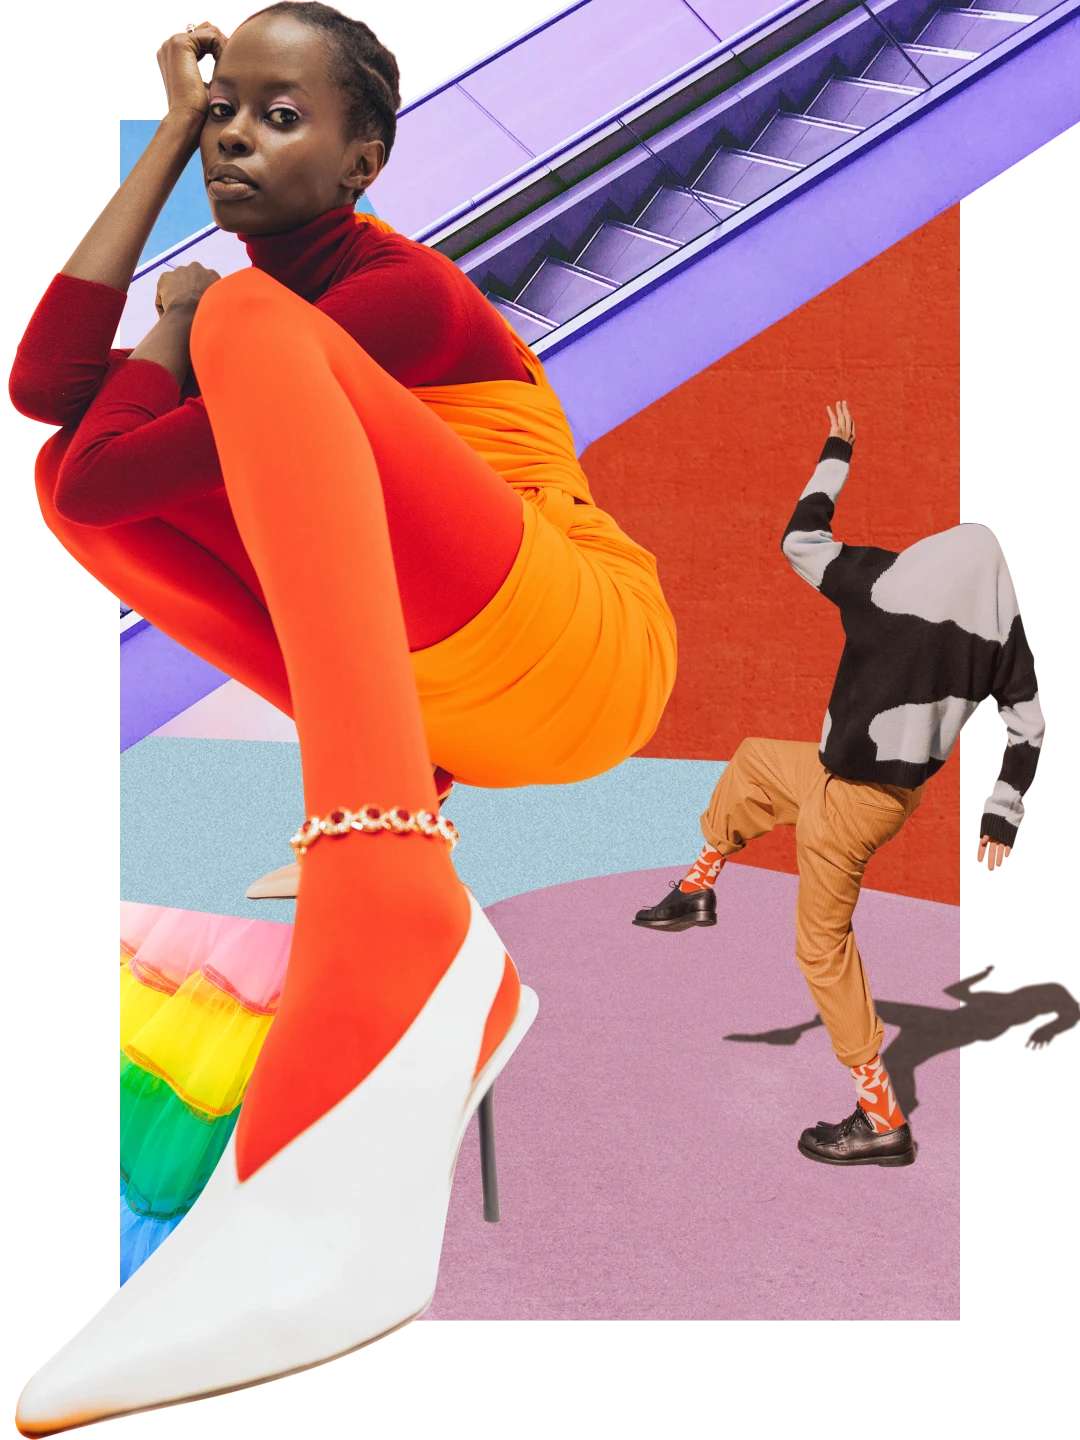 Collage of bright colours and clothing. A Black woman on the left is wearing a bright orange outfit. A person on the right wears a printed top pulled over their head, orange trousers and orange socks. A purple escalator is in the background at the top.
